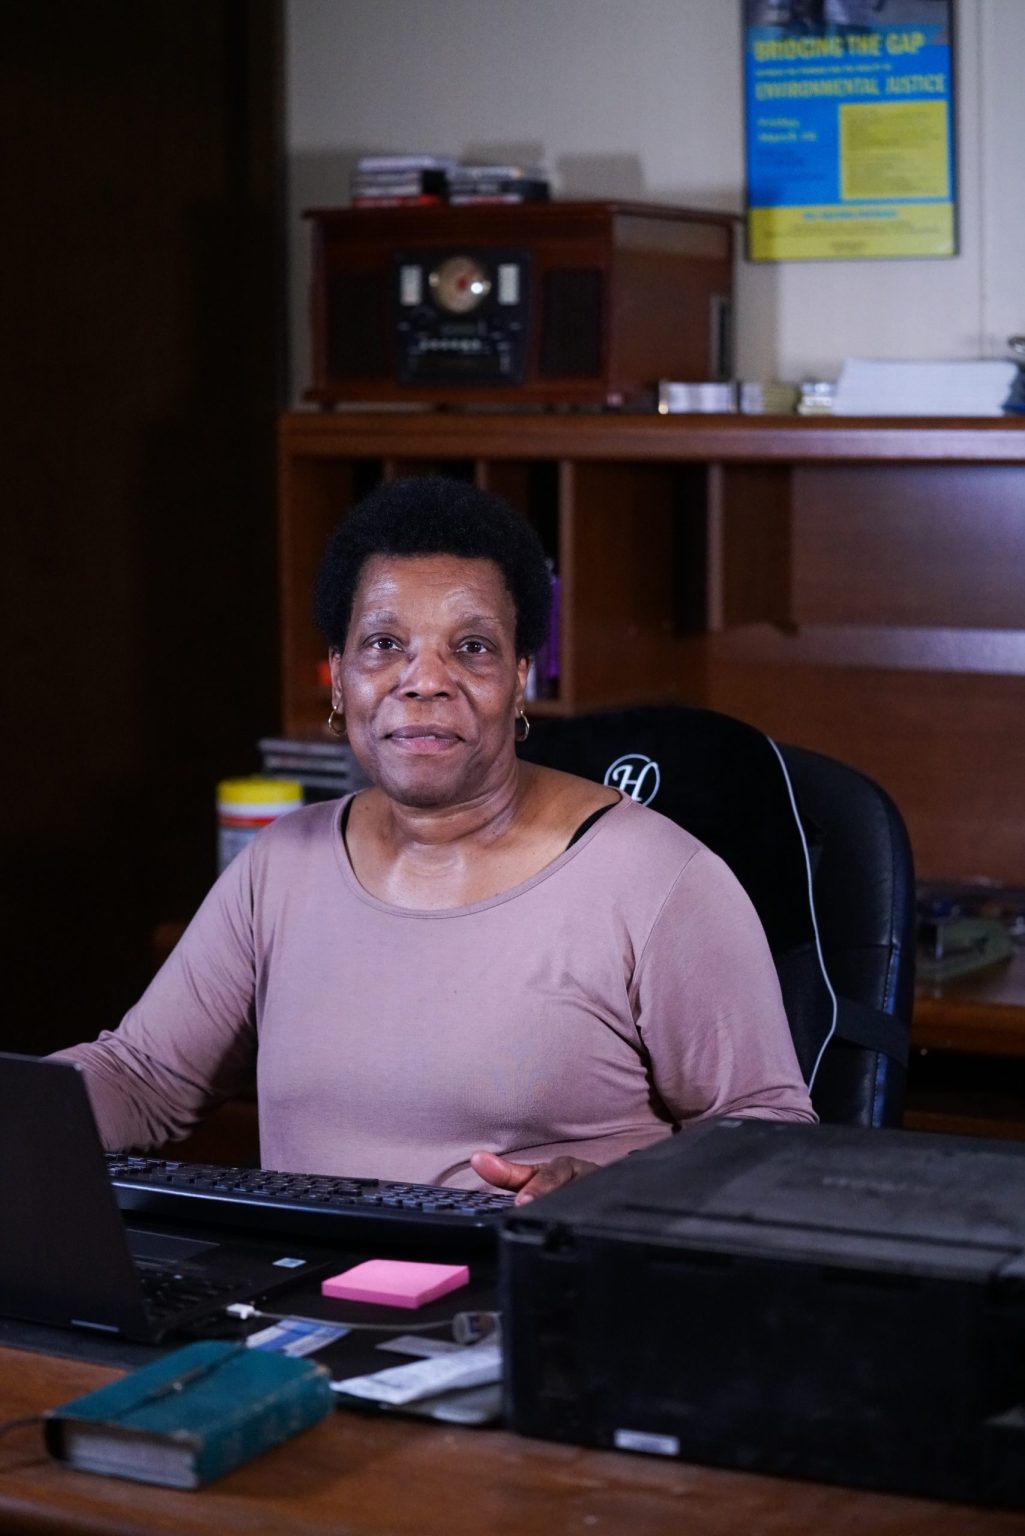 Sherri White-Williamson at her desk in Clinton, North Carolina. White-Williamson is the Environmental Justice Policy Director of the NC Conservation Network.